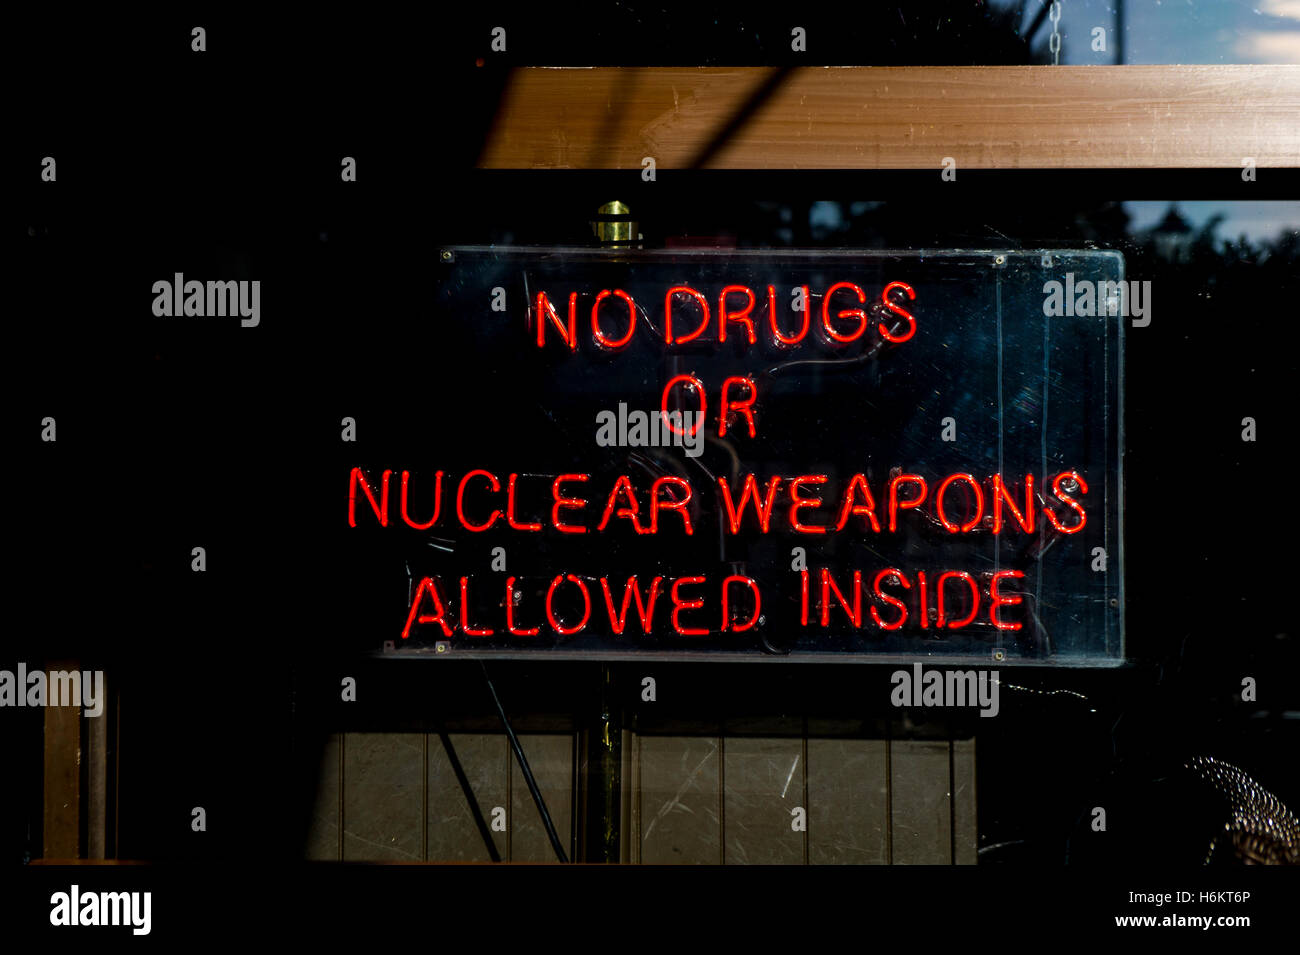 No drugs or nuclear weapons allowed inside sign Stock Photo